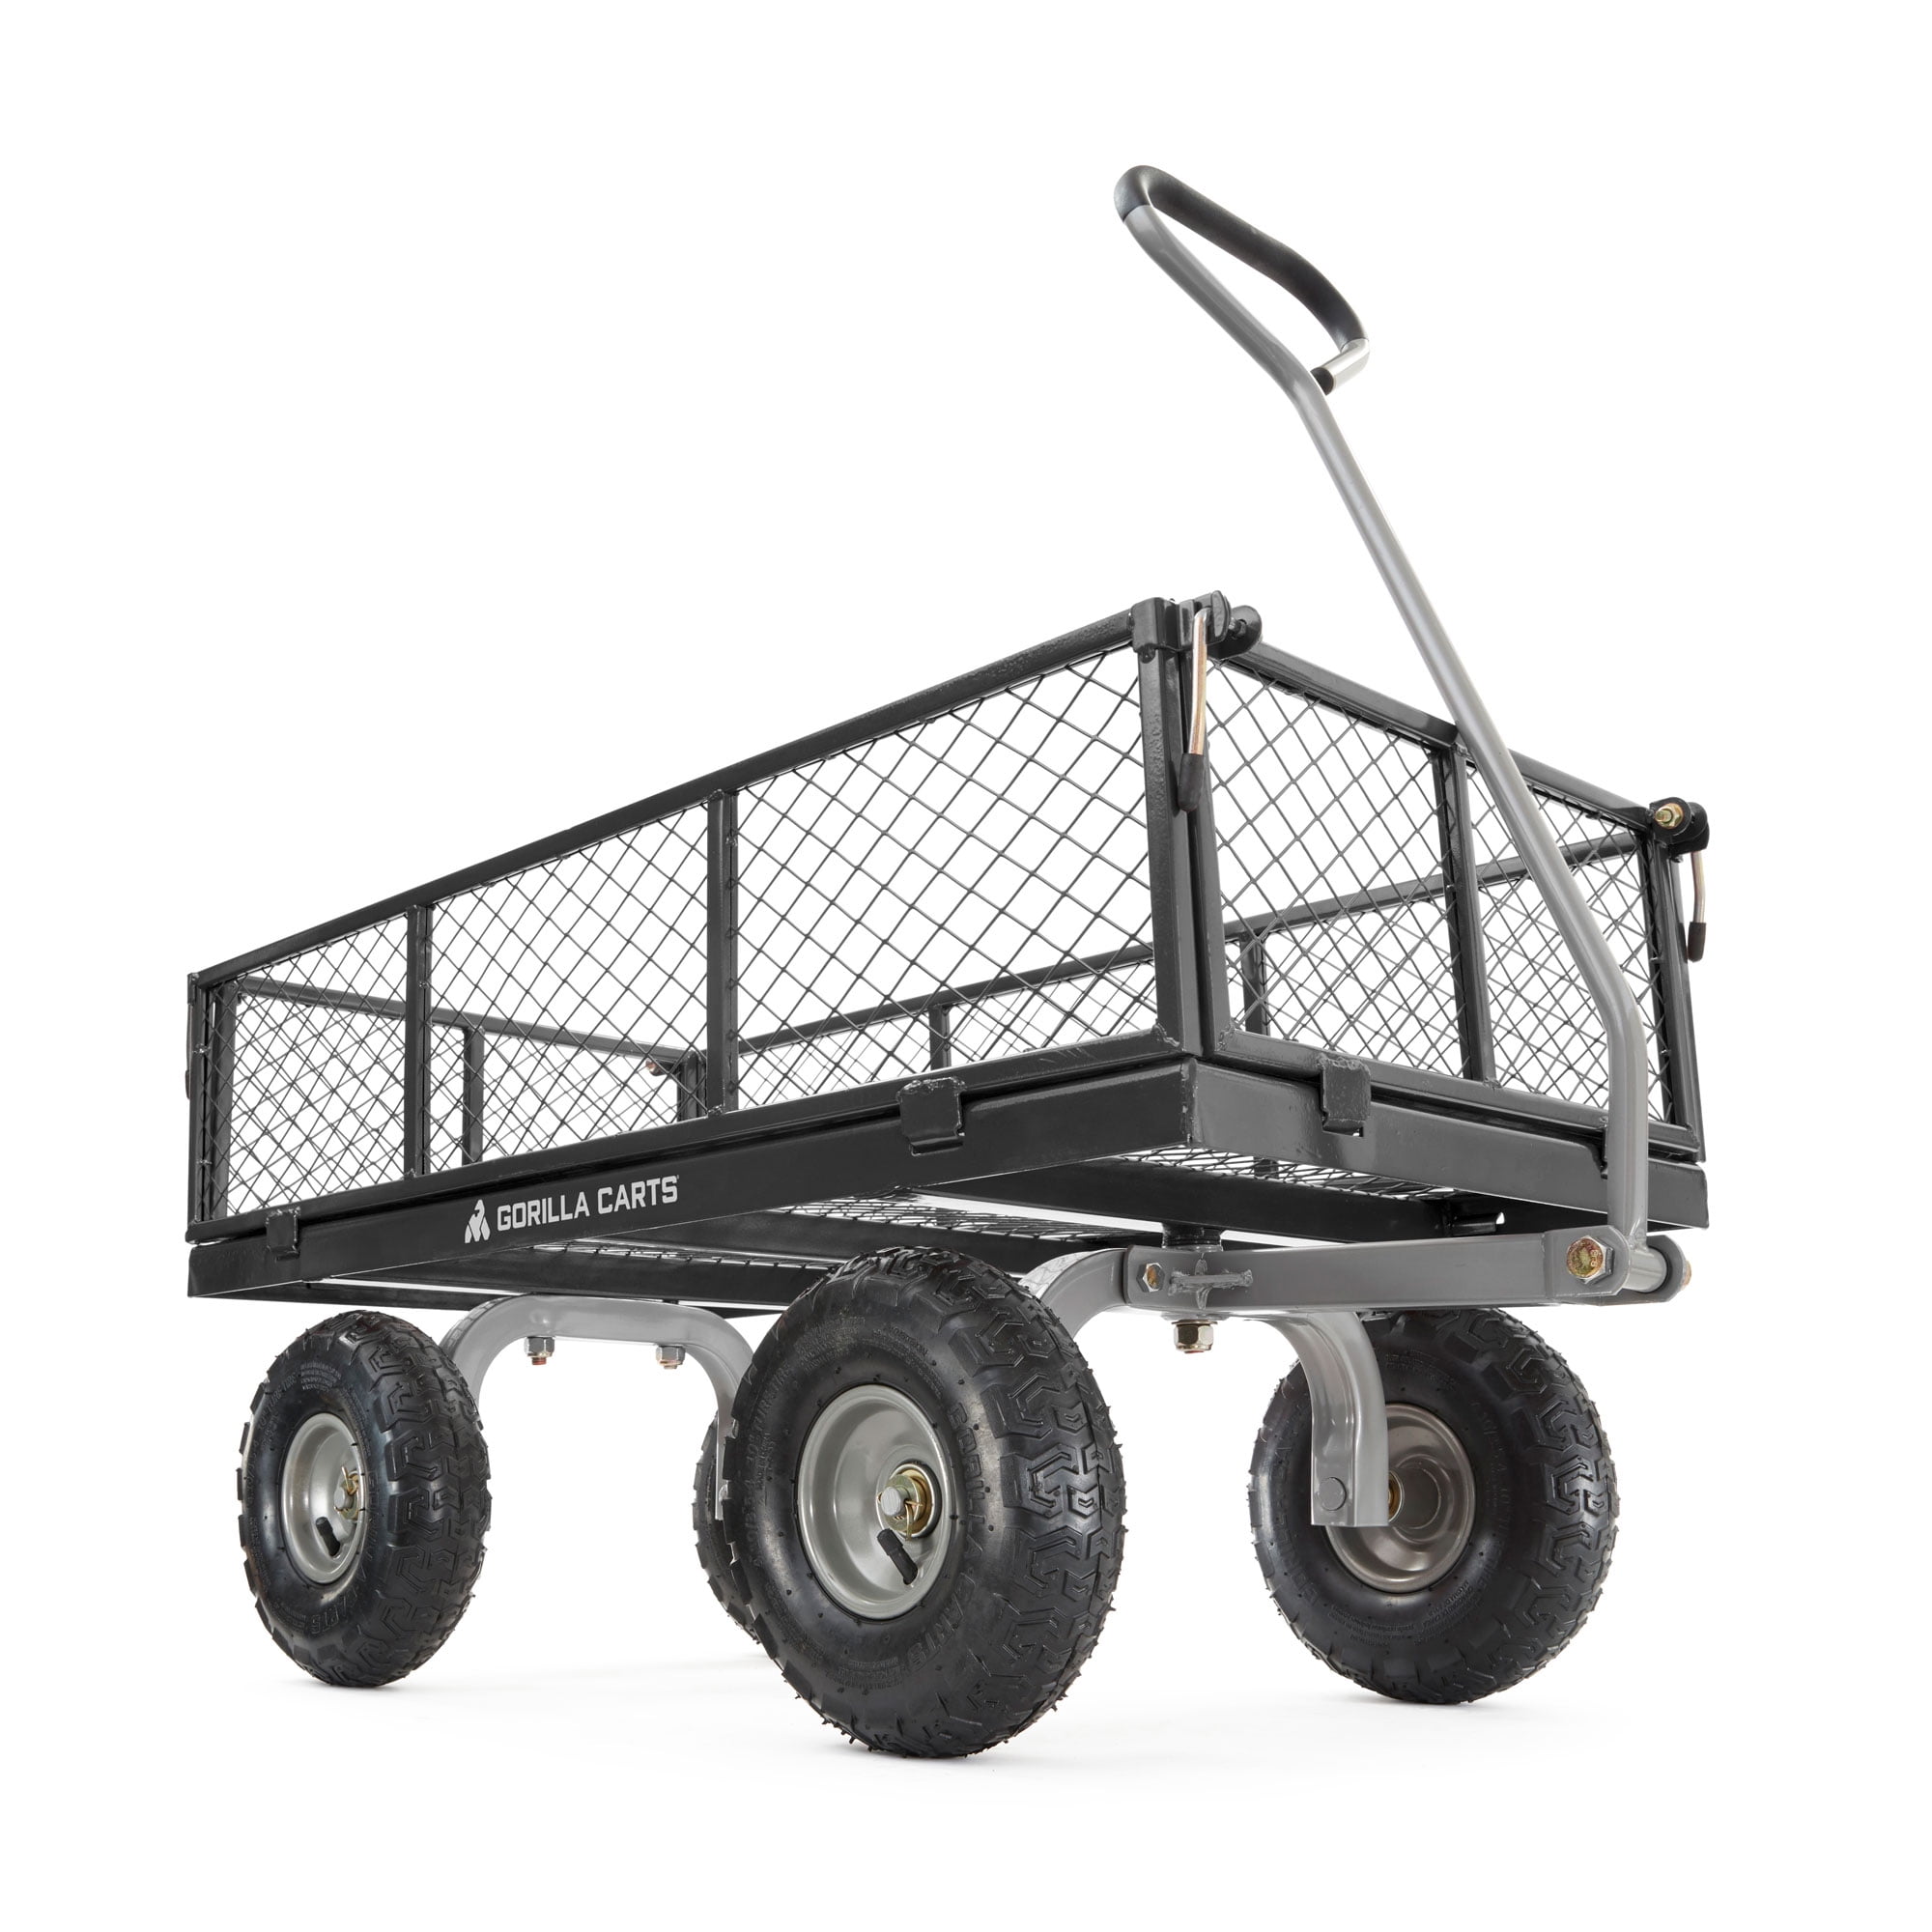 Collapsible Utility Cart Heavy duty Folding Utility Cart Convertible Cart 